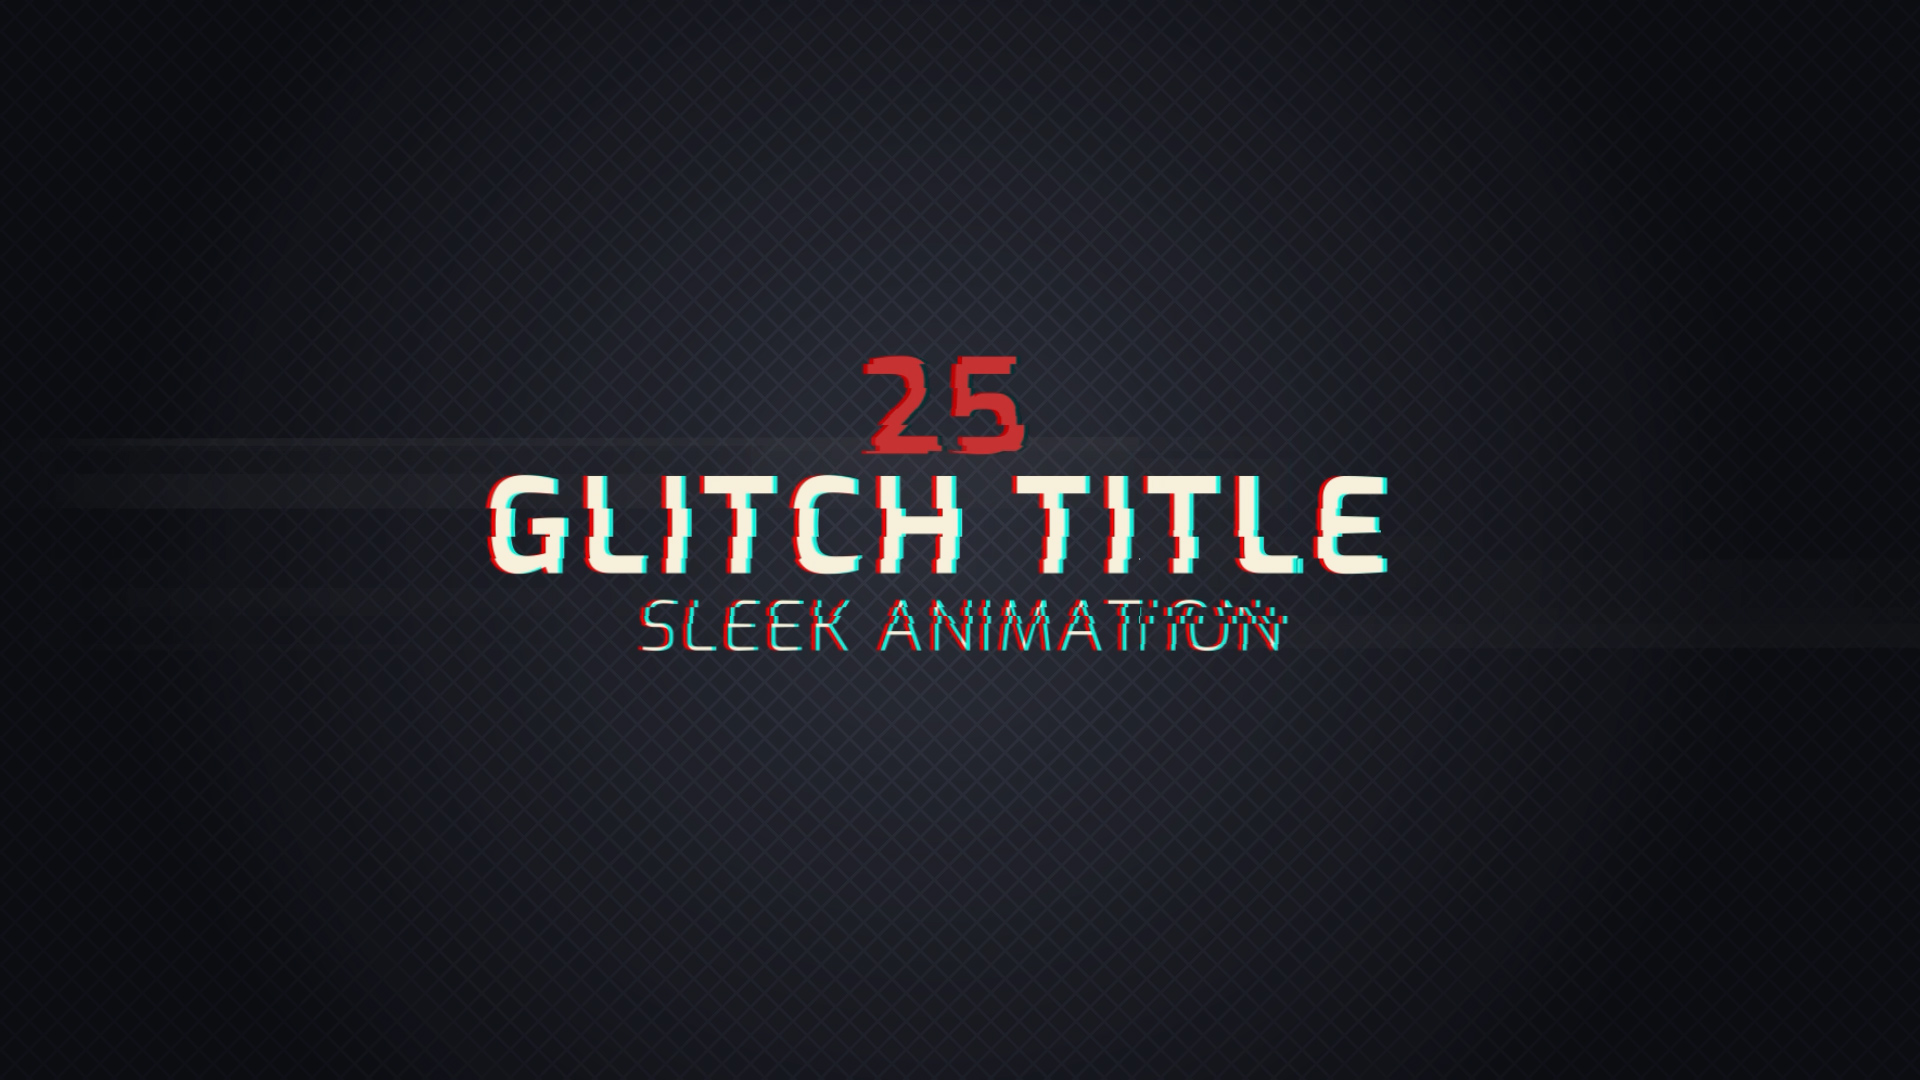 Bold animation pack. Glitch titles. Glitch title Pack. Glitch анимация Афтер эффект. Title after Effects.